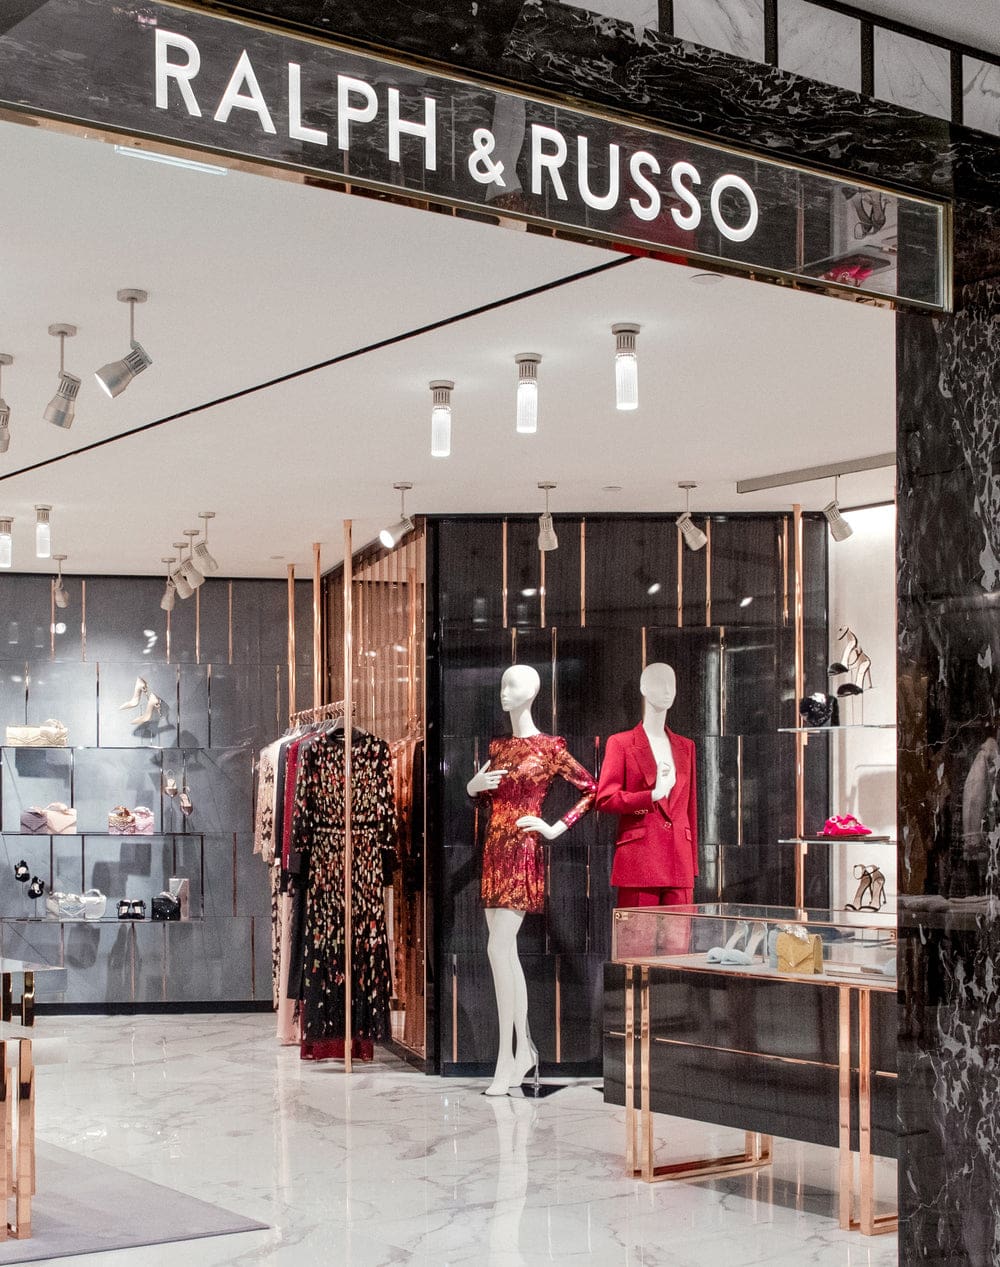 Ralph & Russo opened its first retail boutique in the London department store, Harrods, in 2015